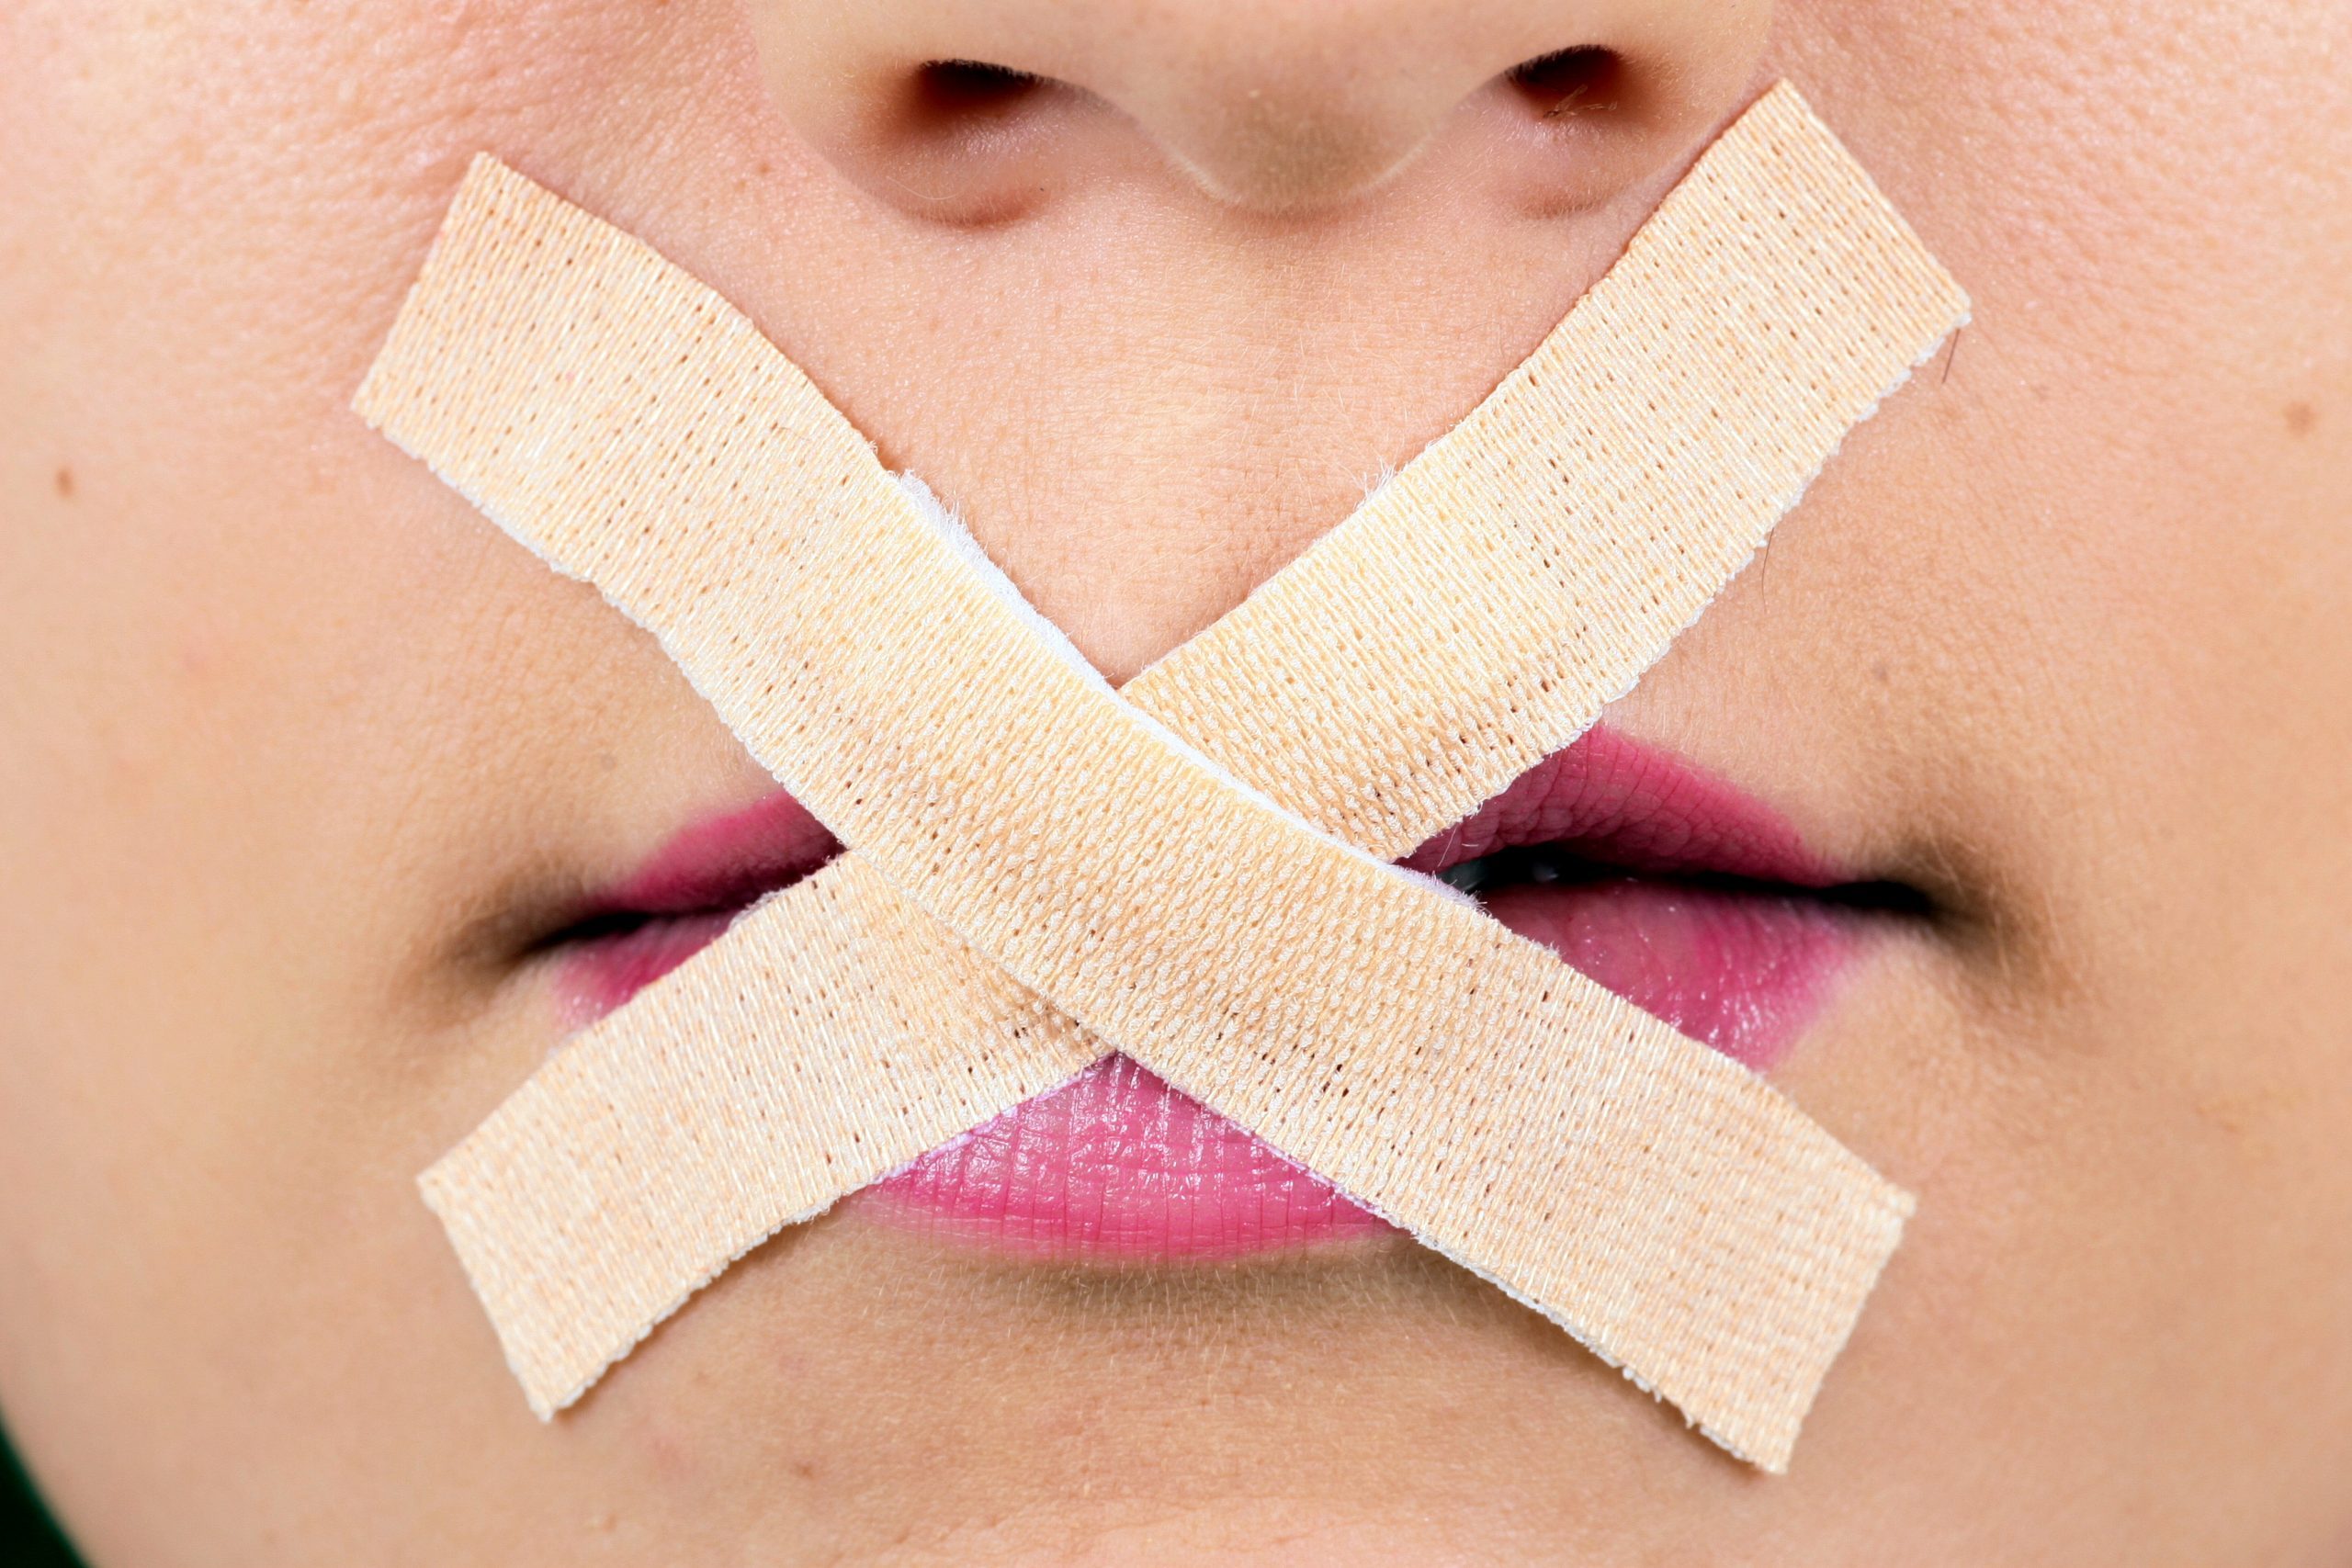 What Is Mouth Taping? What You Need to Know About the Viral Trend